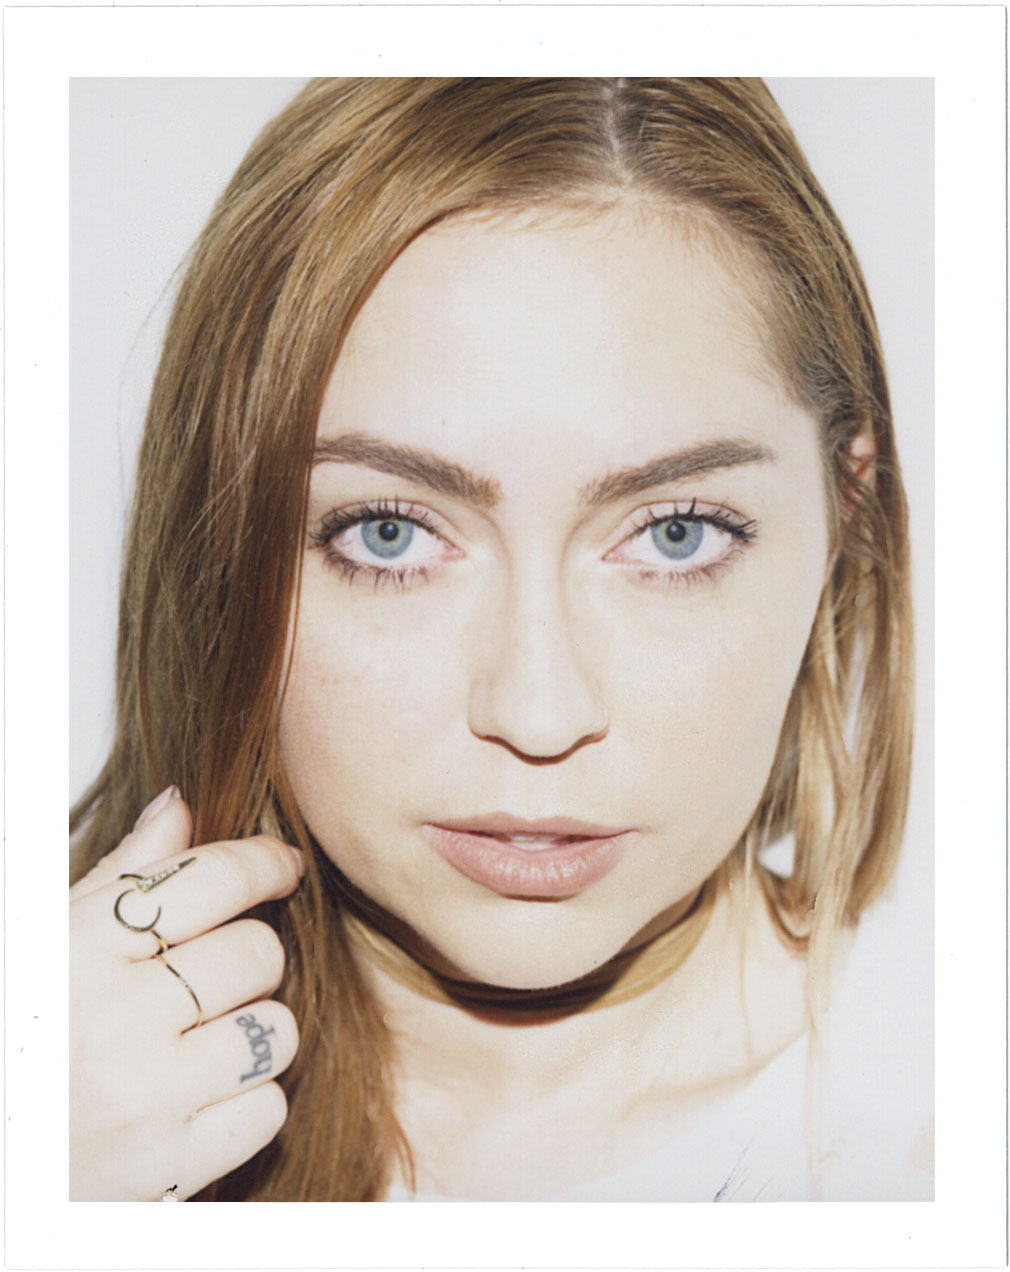 Brandi Cyrus for Nice People Only Influencer Project by Jane Smith Creative Agency